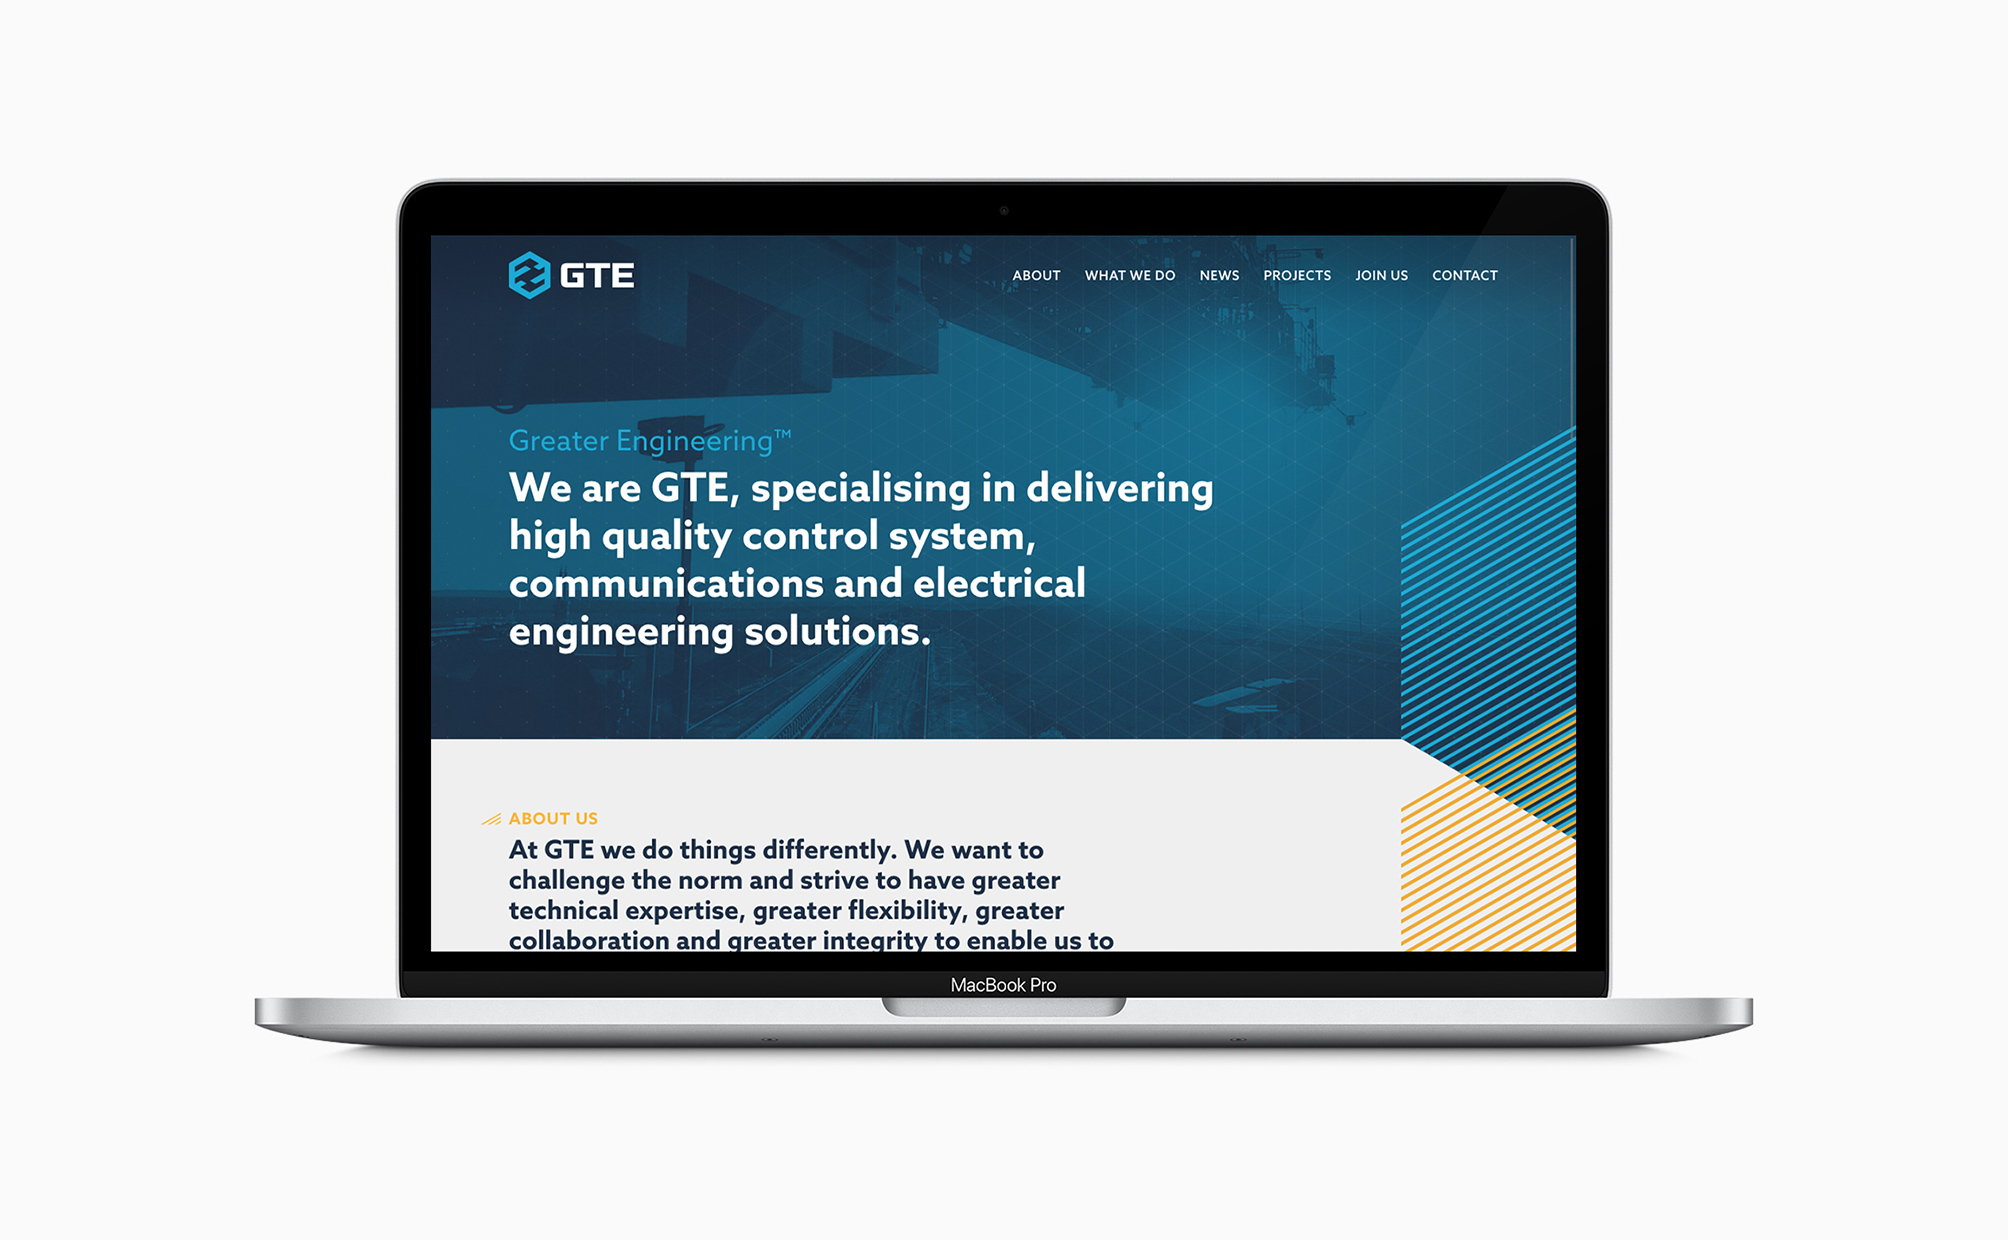 The new GTE Group website designed by Axiom.